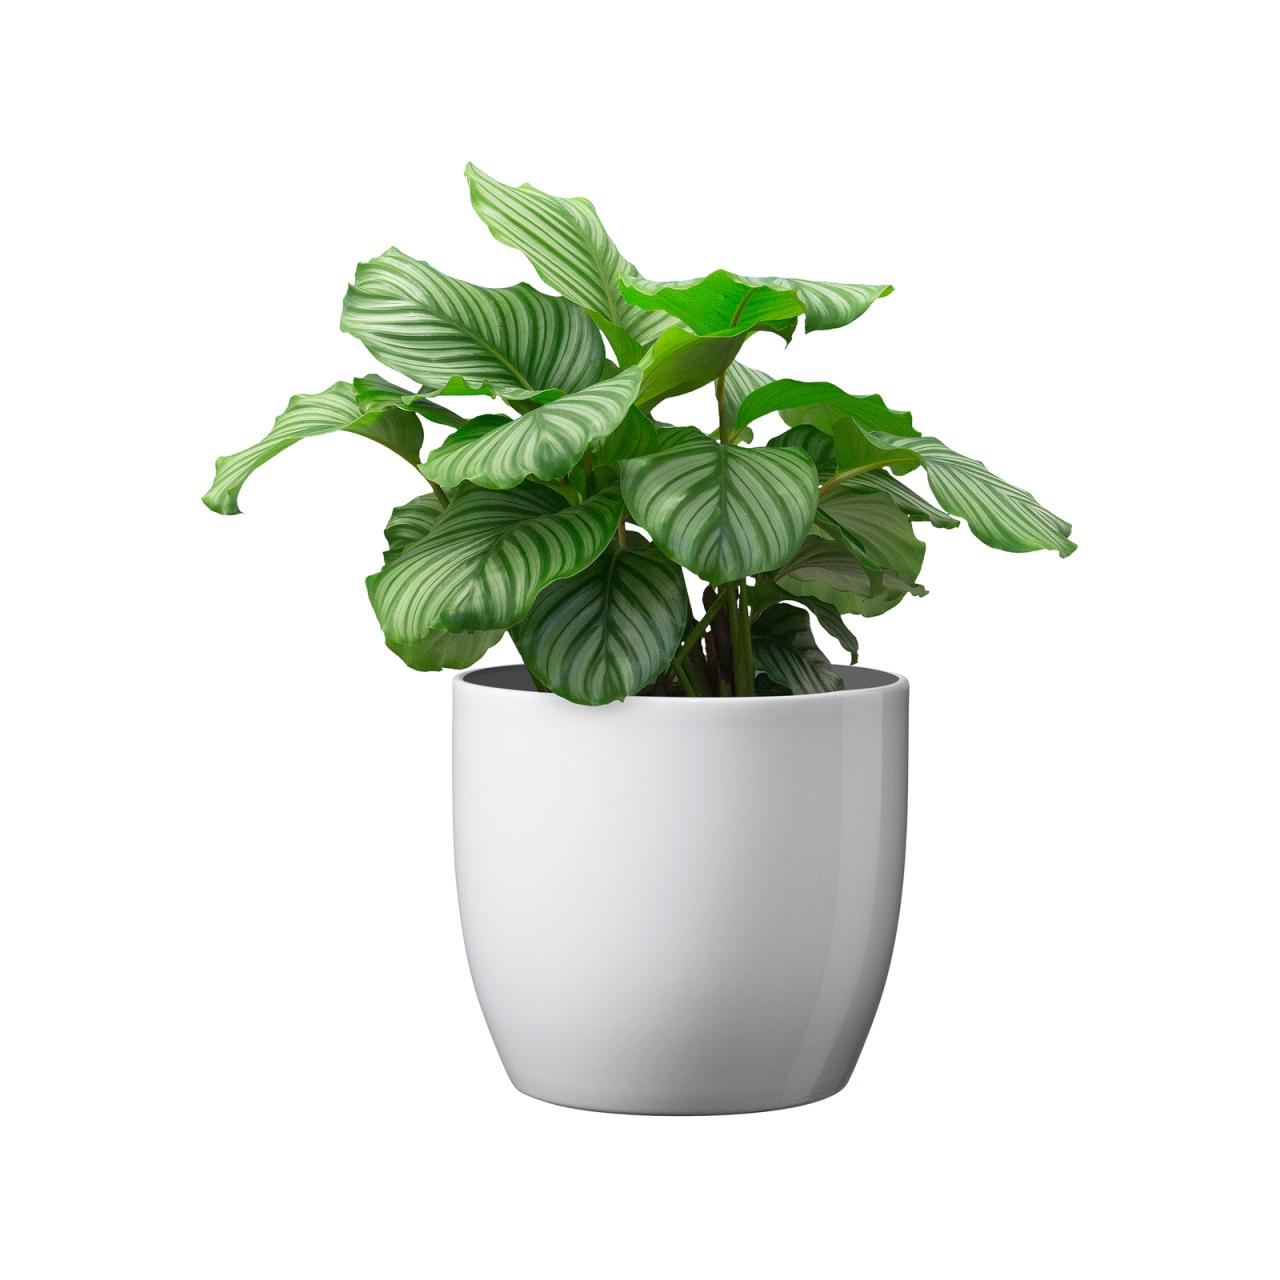 Hanging Plants Indoor | Bunnings Indoor Pot Plants: A Guide to Choosing, Caring For, and Styling